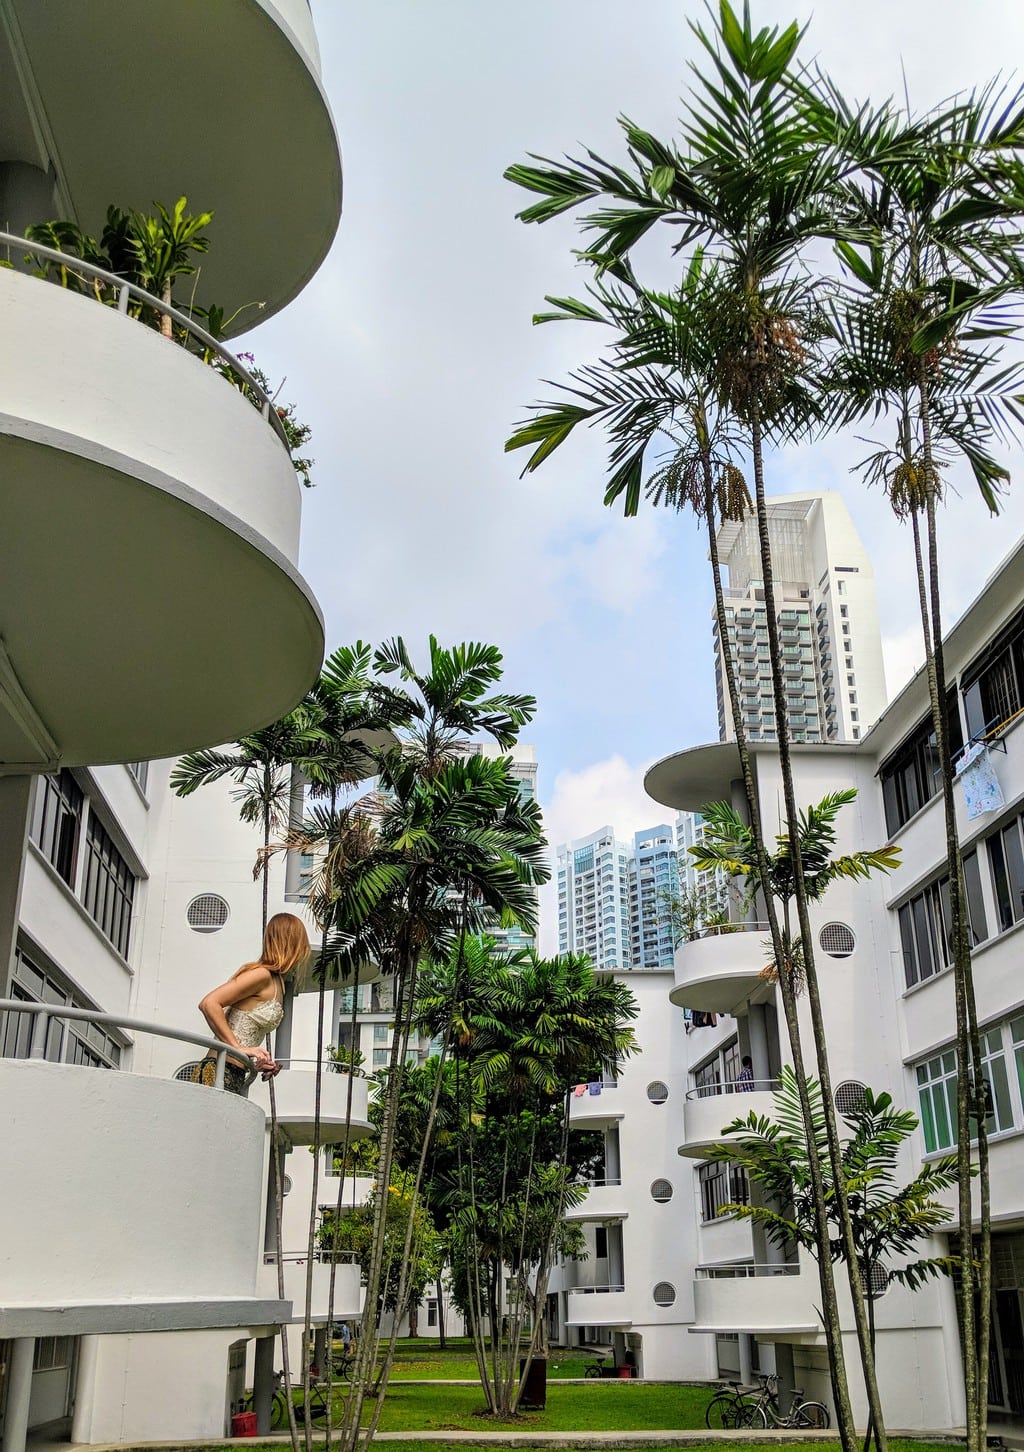 Tiong Bahru architecture